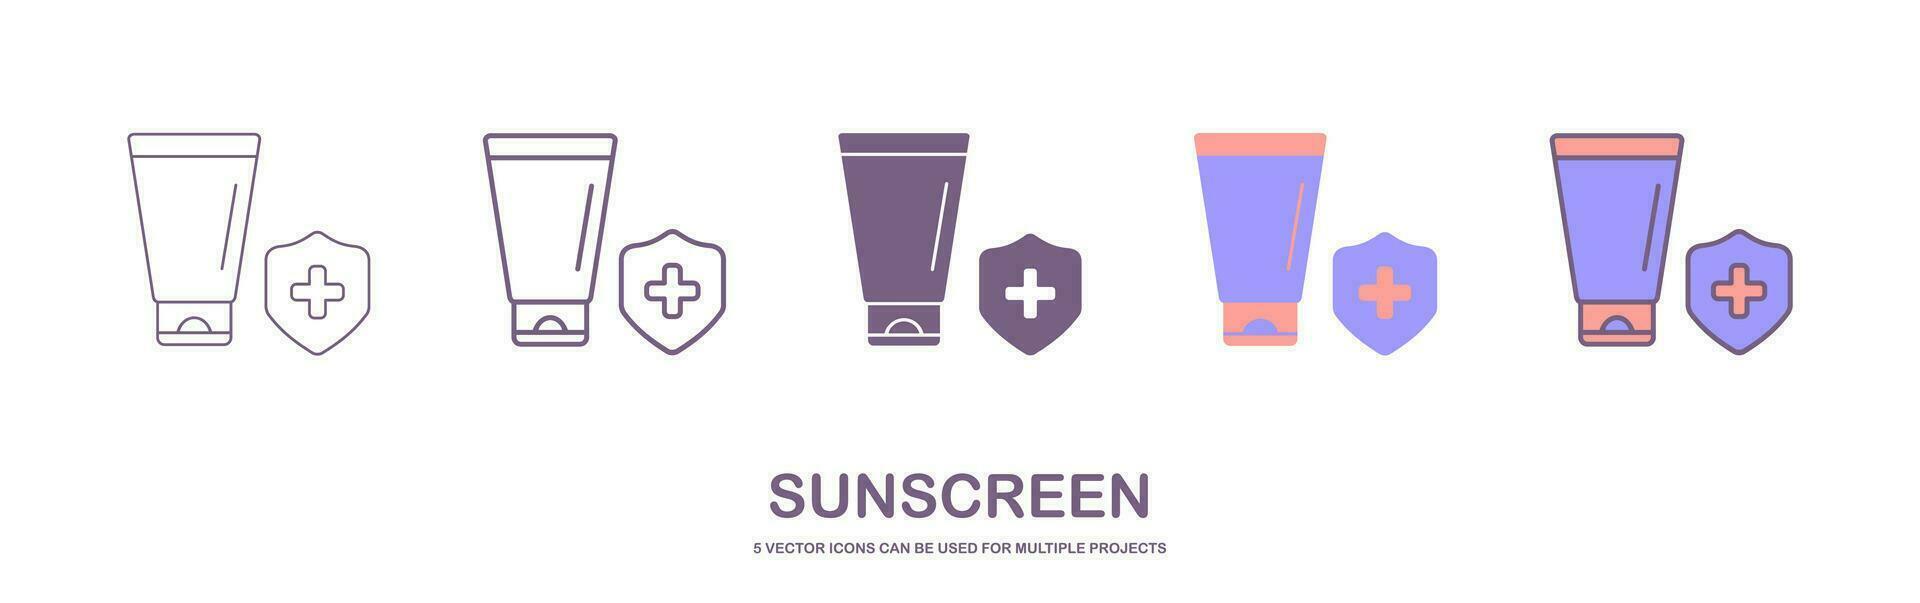 Simple sunscreen line icon. Stroke pictogram. Vector illustration isolated on a white background. Premium quality symbol. Vector sign for mobile app